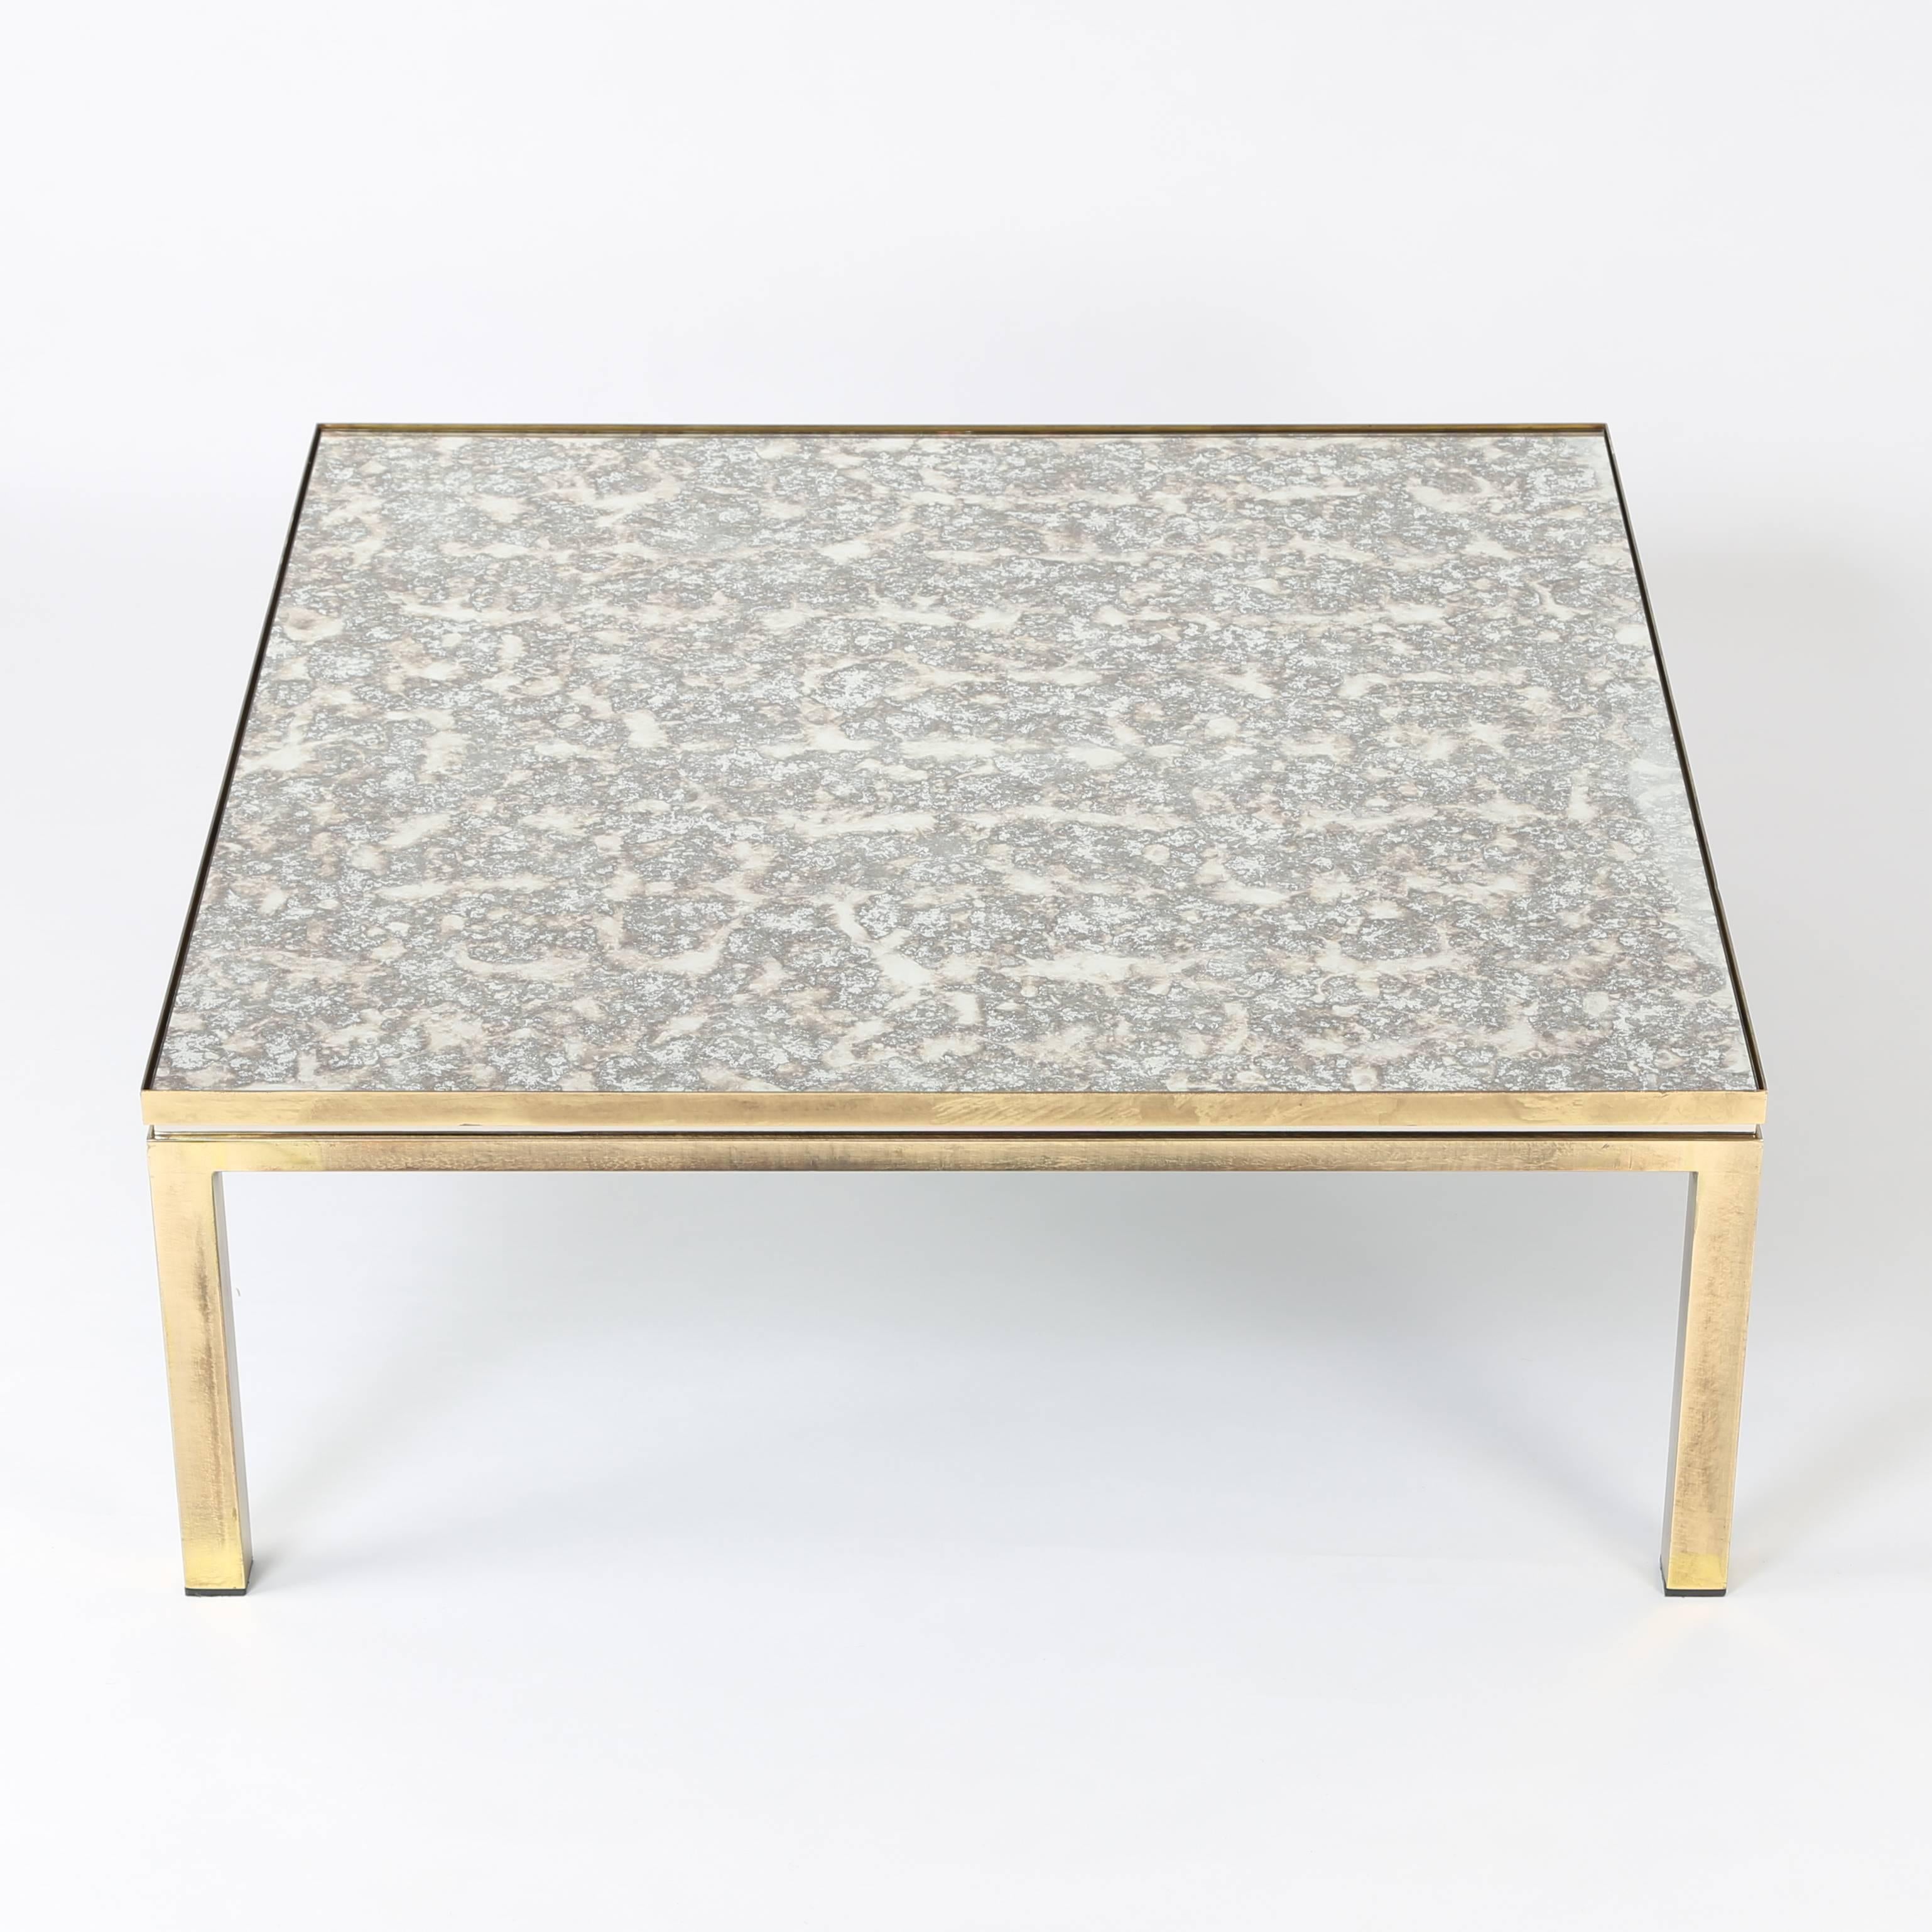 Patinated Italian Brass, Chrome and Antiqued Mirror Coffee Table, circa 1970s